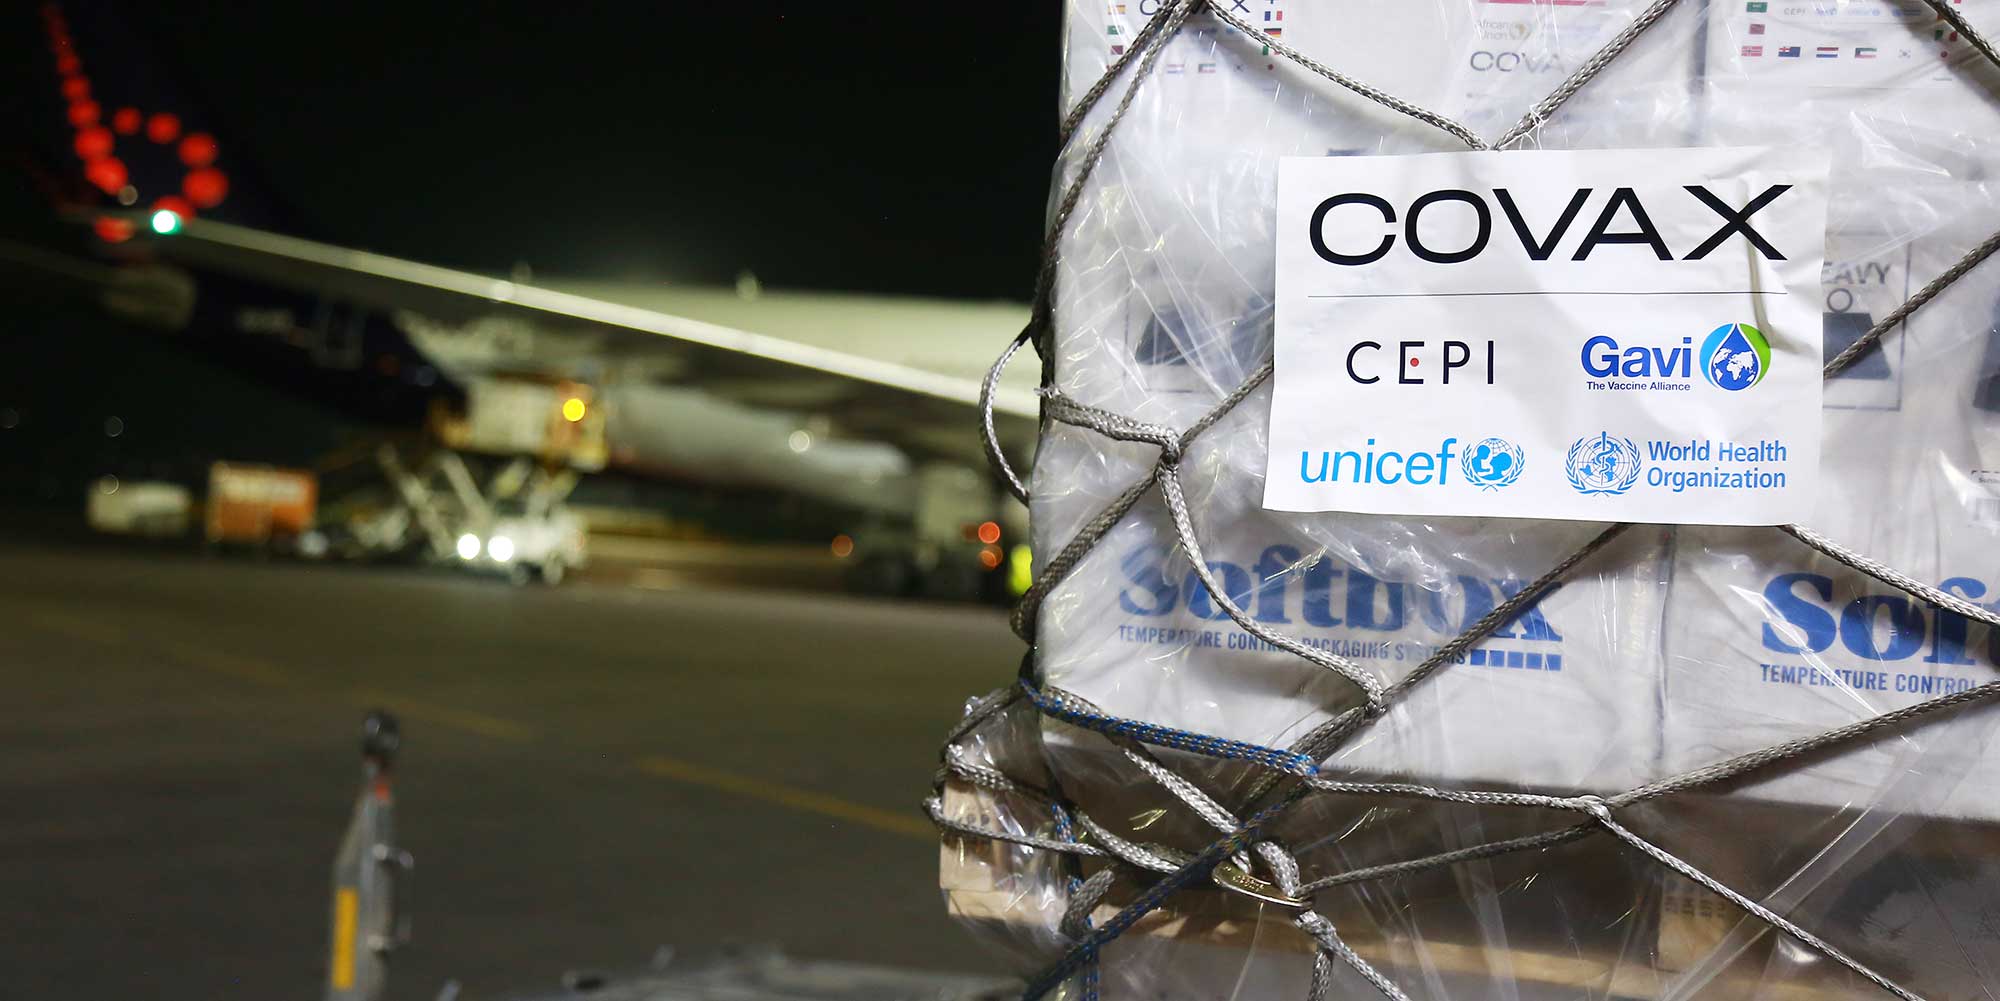 COVID-19 vaccines, procured by the COVAX Facility, arrive at the airport in Kigali in Rwanda. © UNICEF/UN0579046/Kanobana